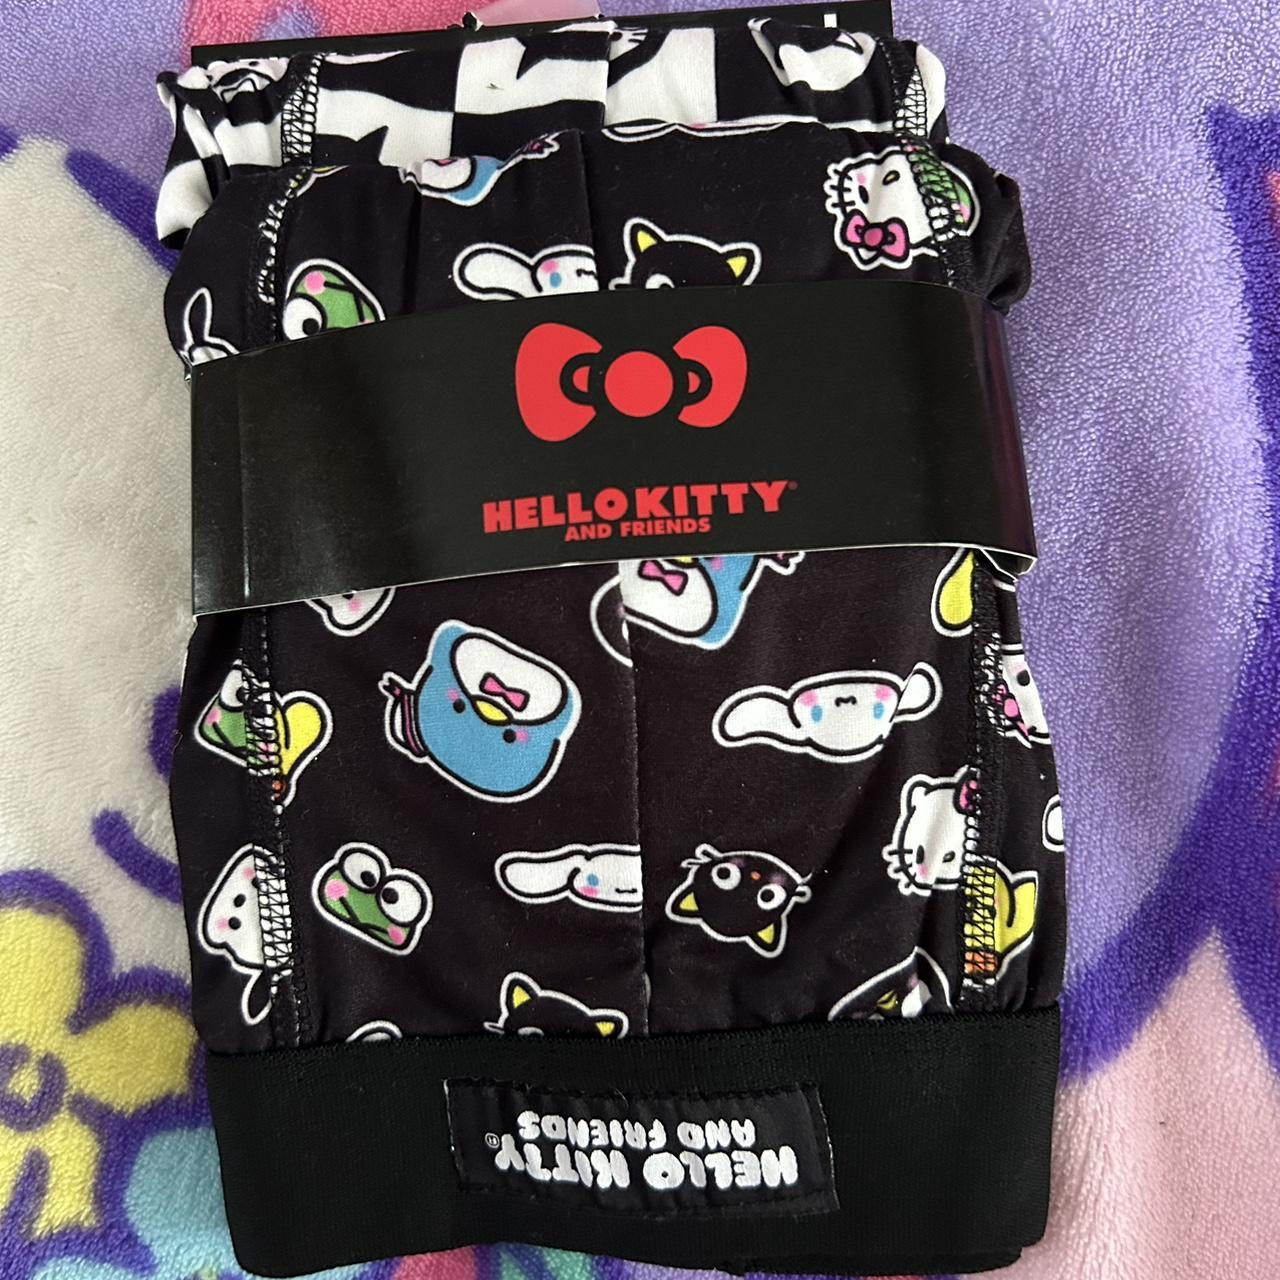 Sexy underwear made with Hello Kitty fabric and pink - Depop